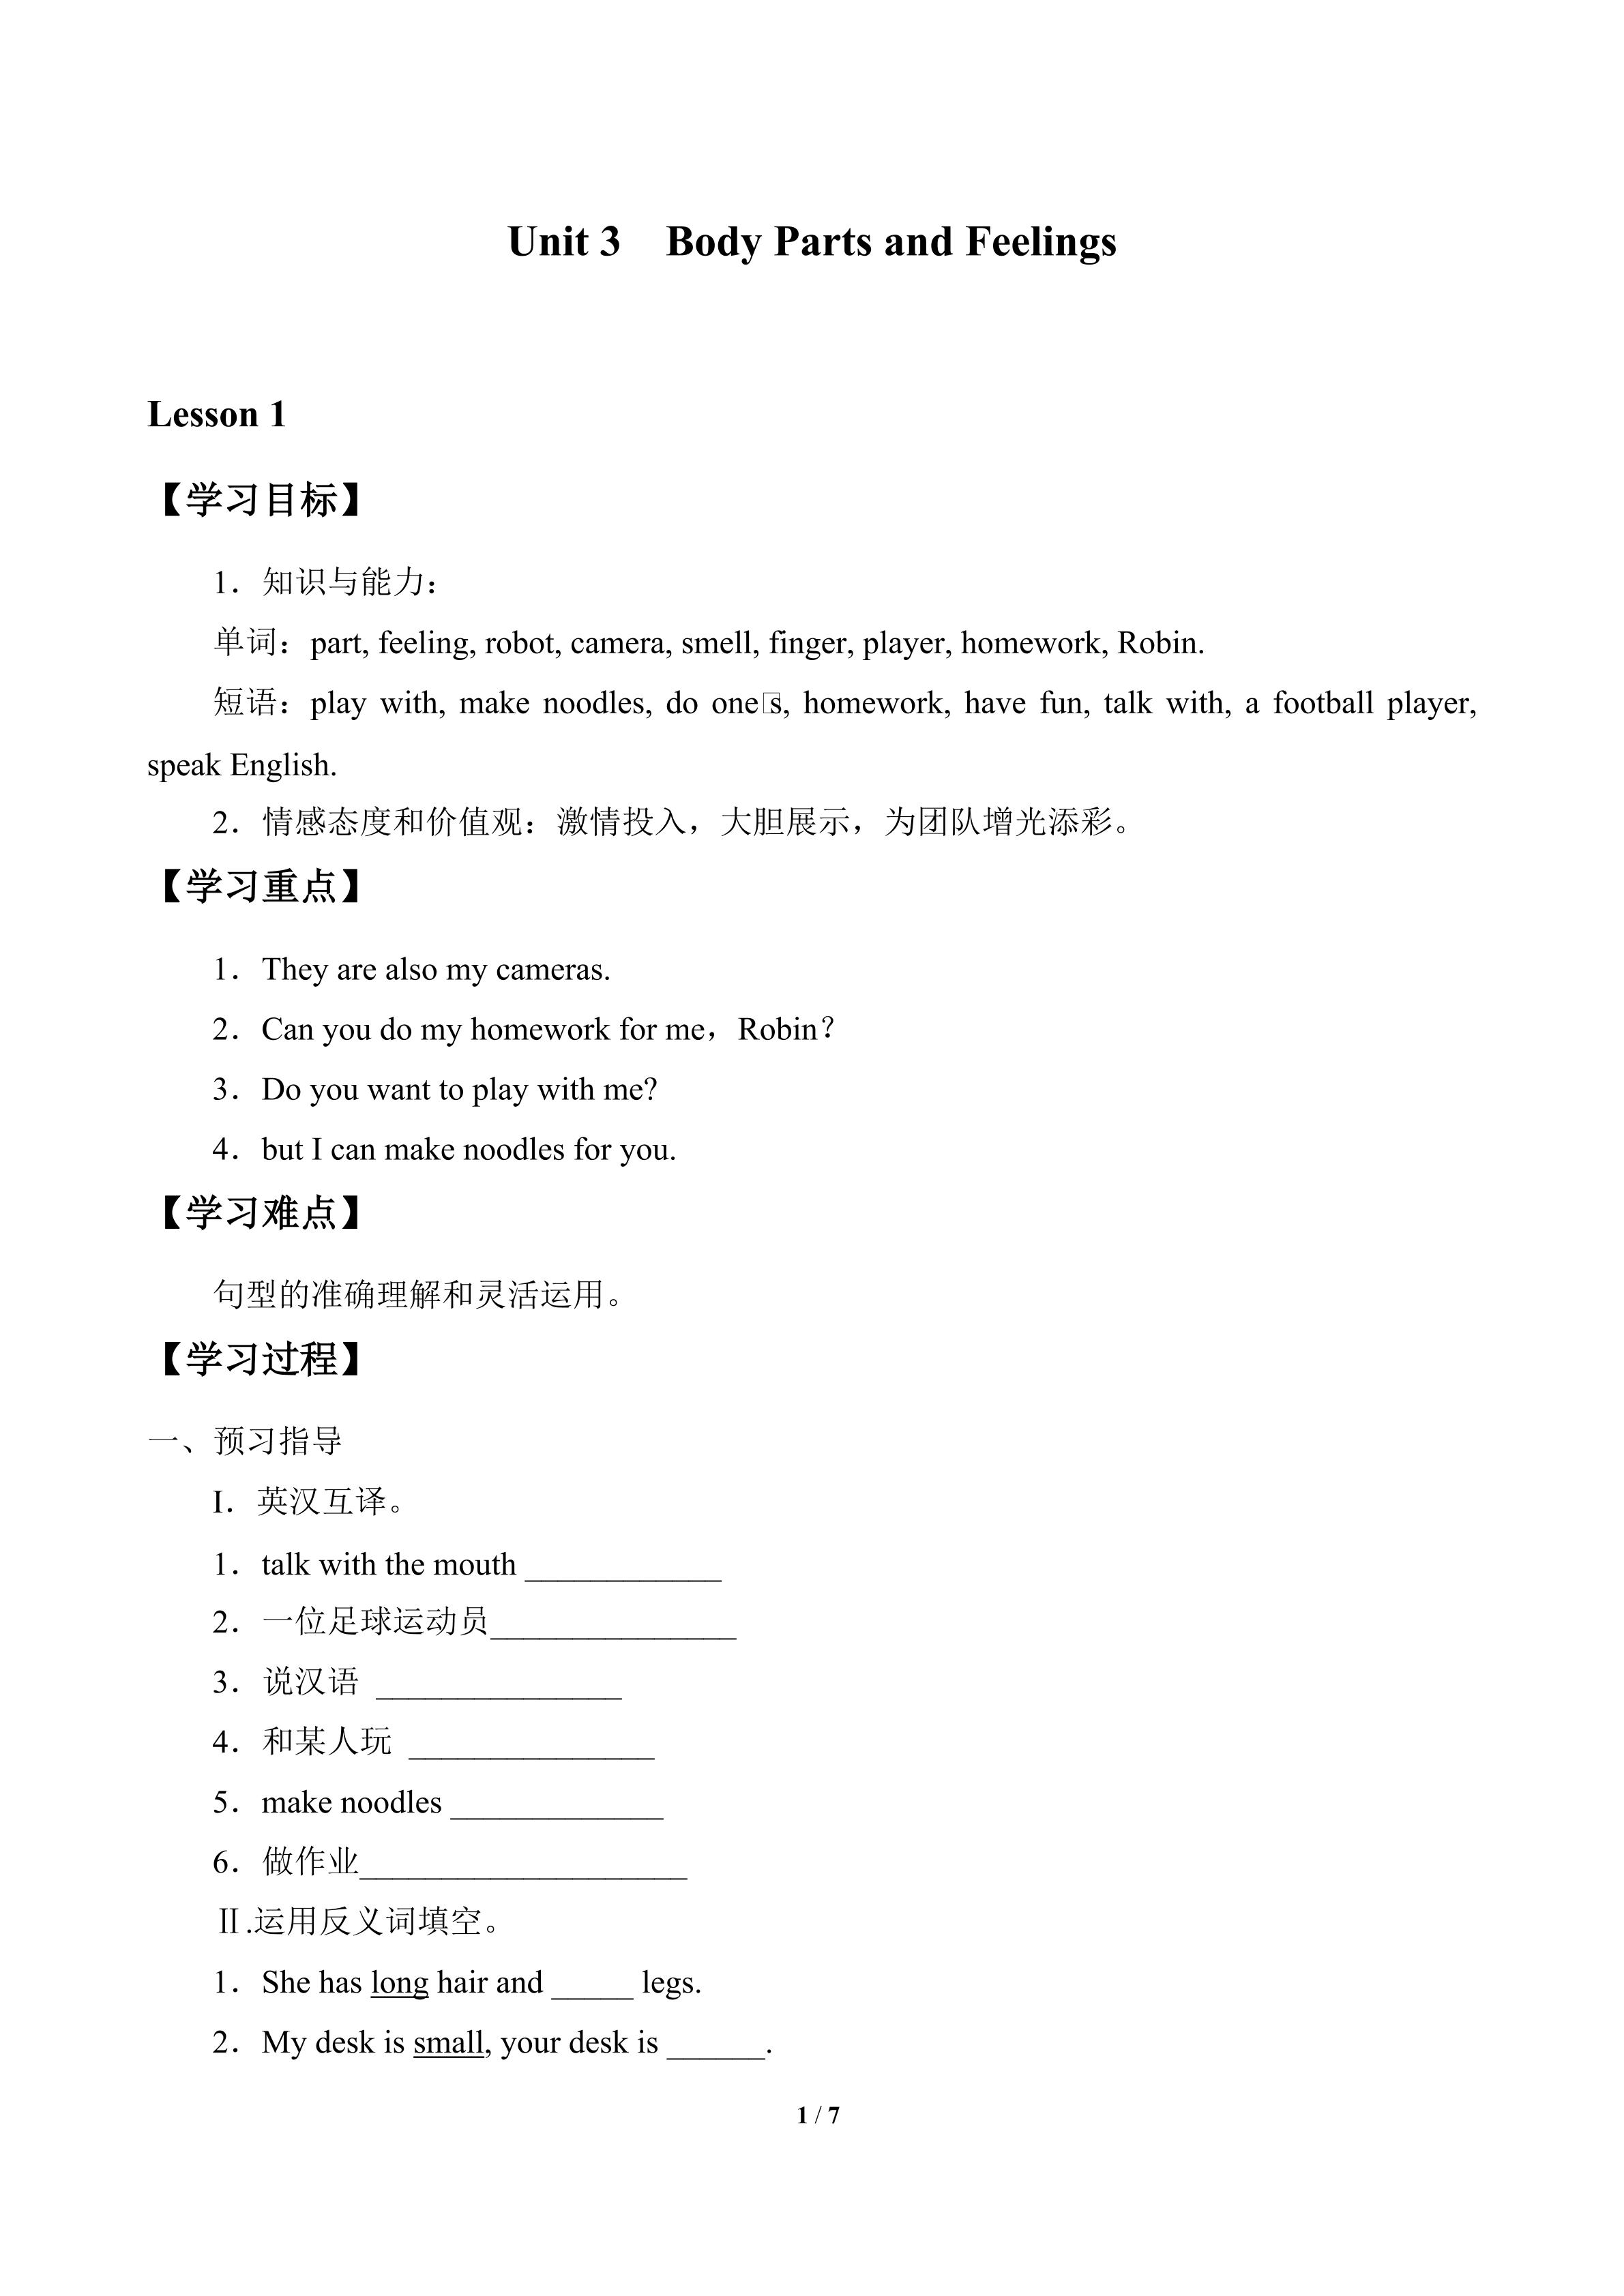 Unit 3  Body Parts and Feelings_学案1